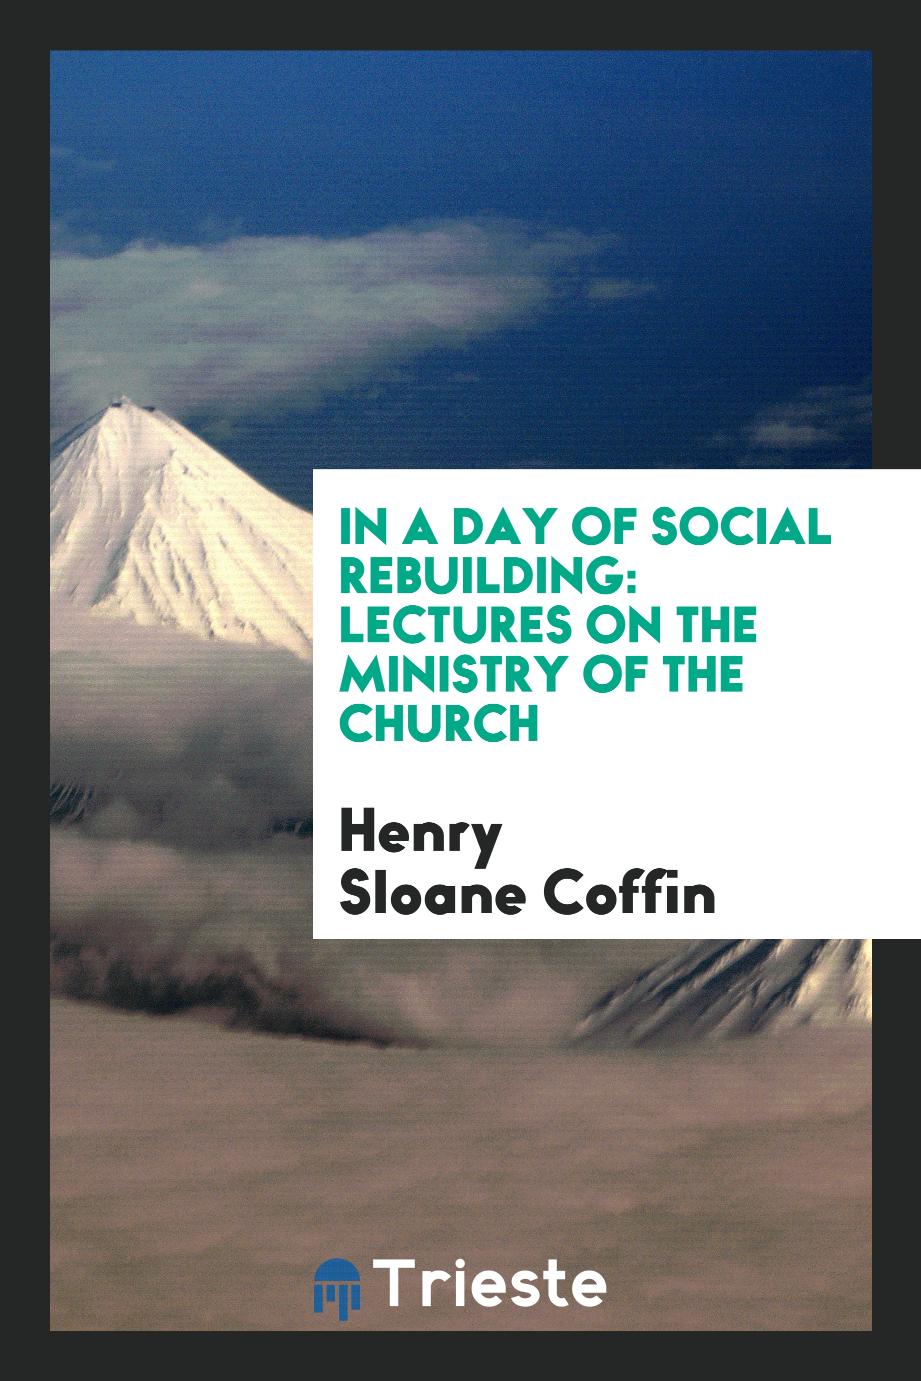 In a Day of Social Rebuilding: Lectures on the Ministry of the Church